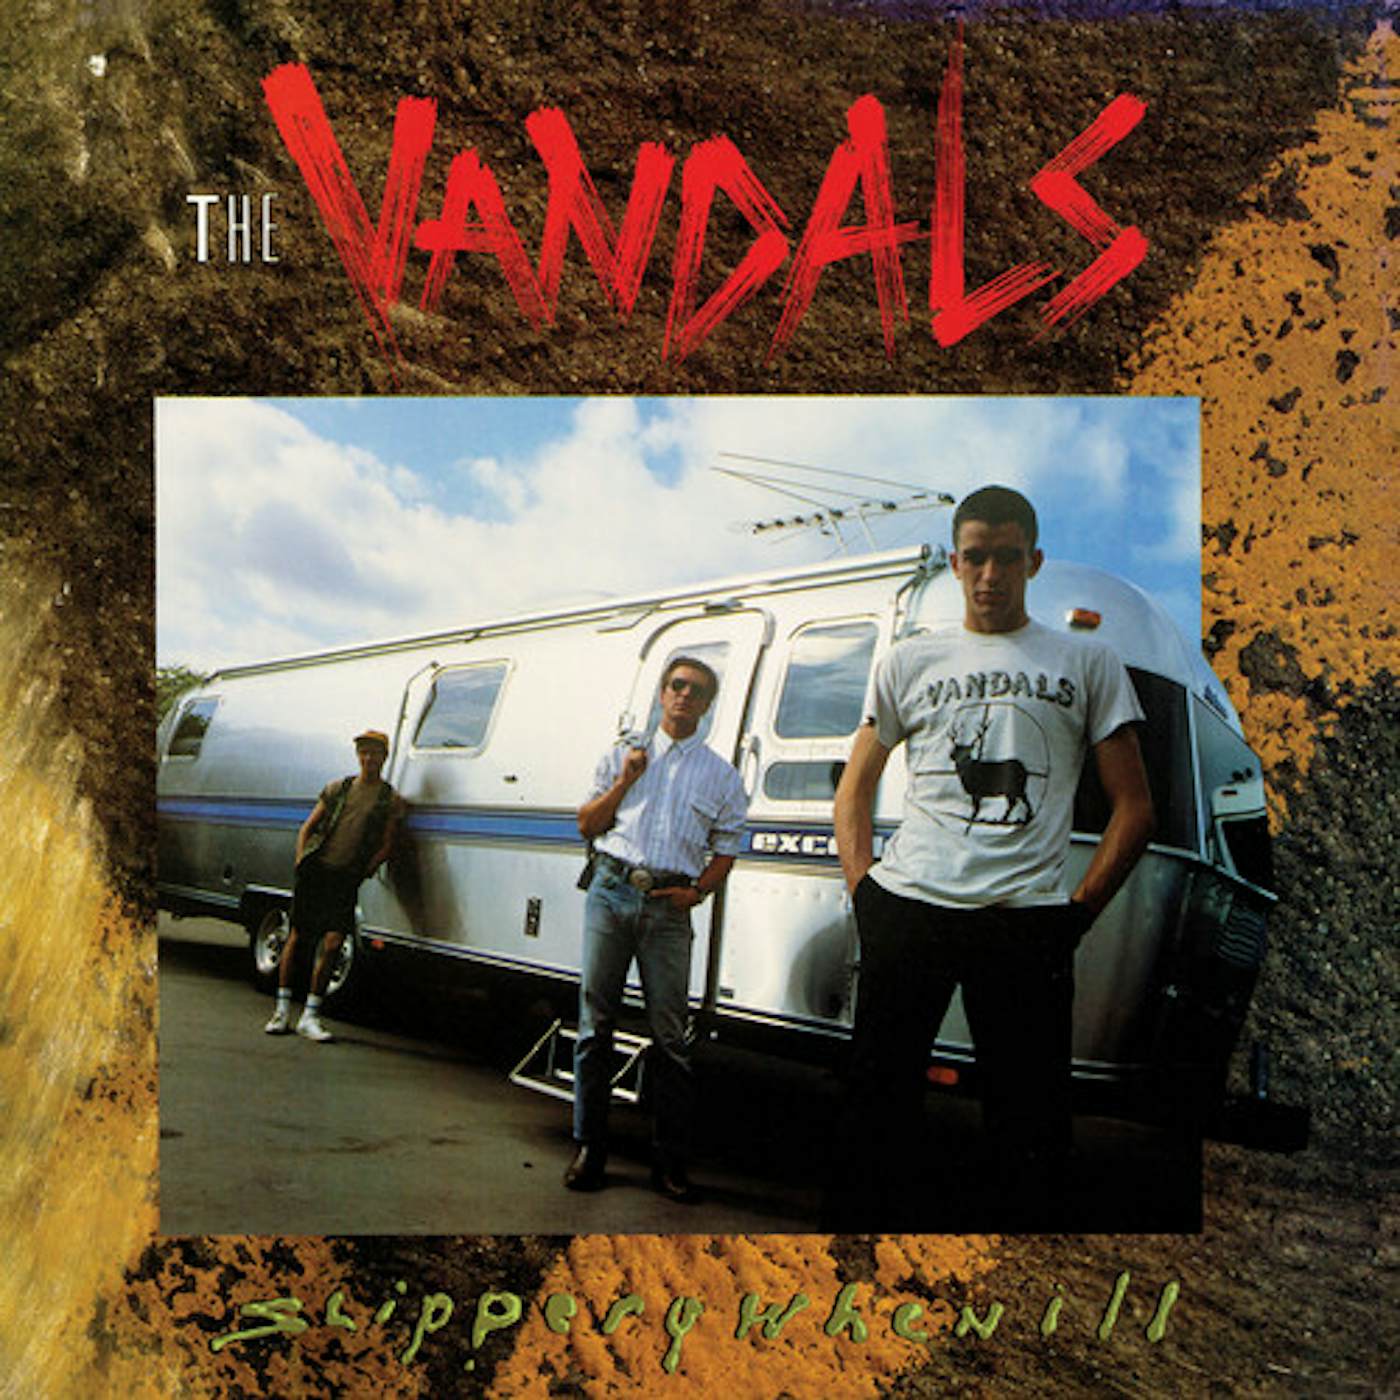 The Vandals  SLIPPERY WHEN ILL - RED MARBLE Vinyl Record